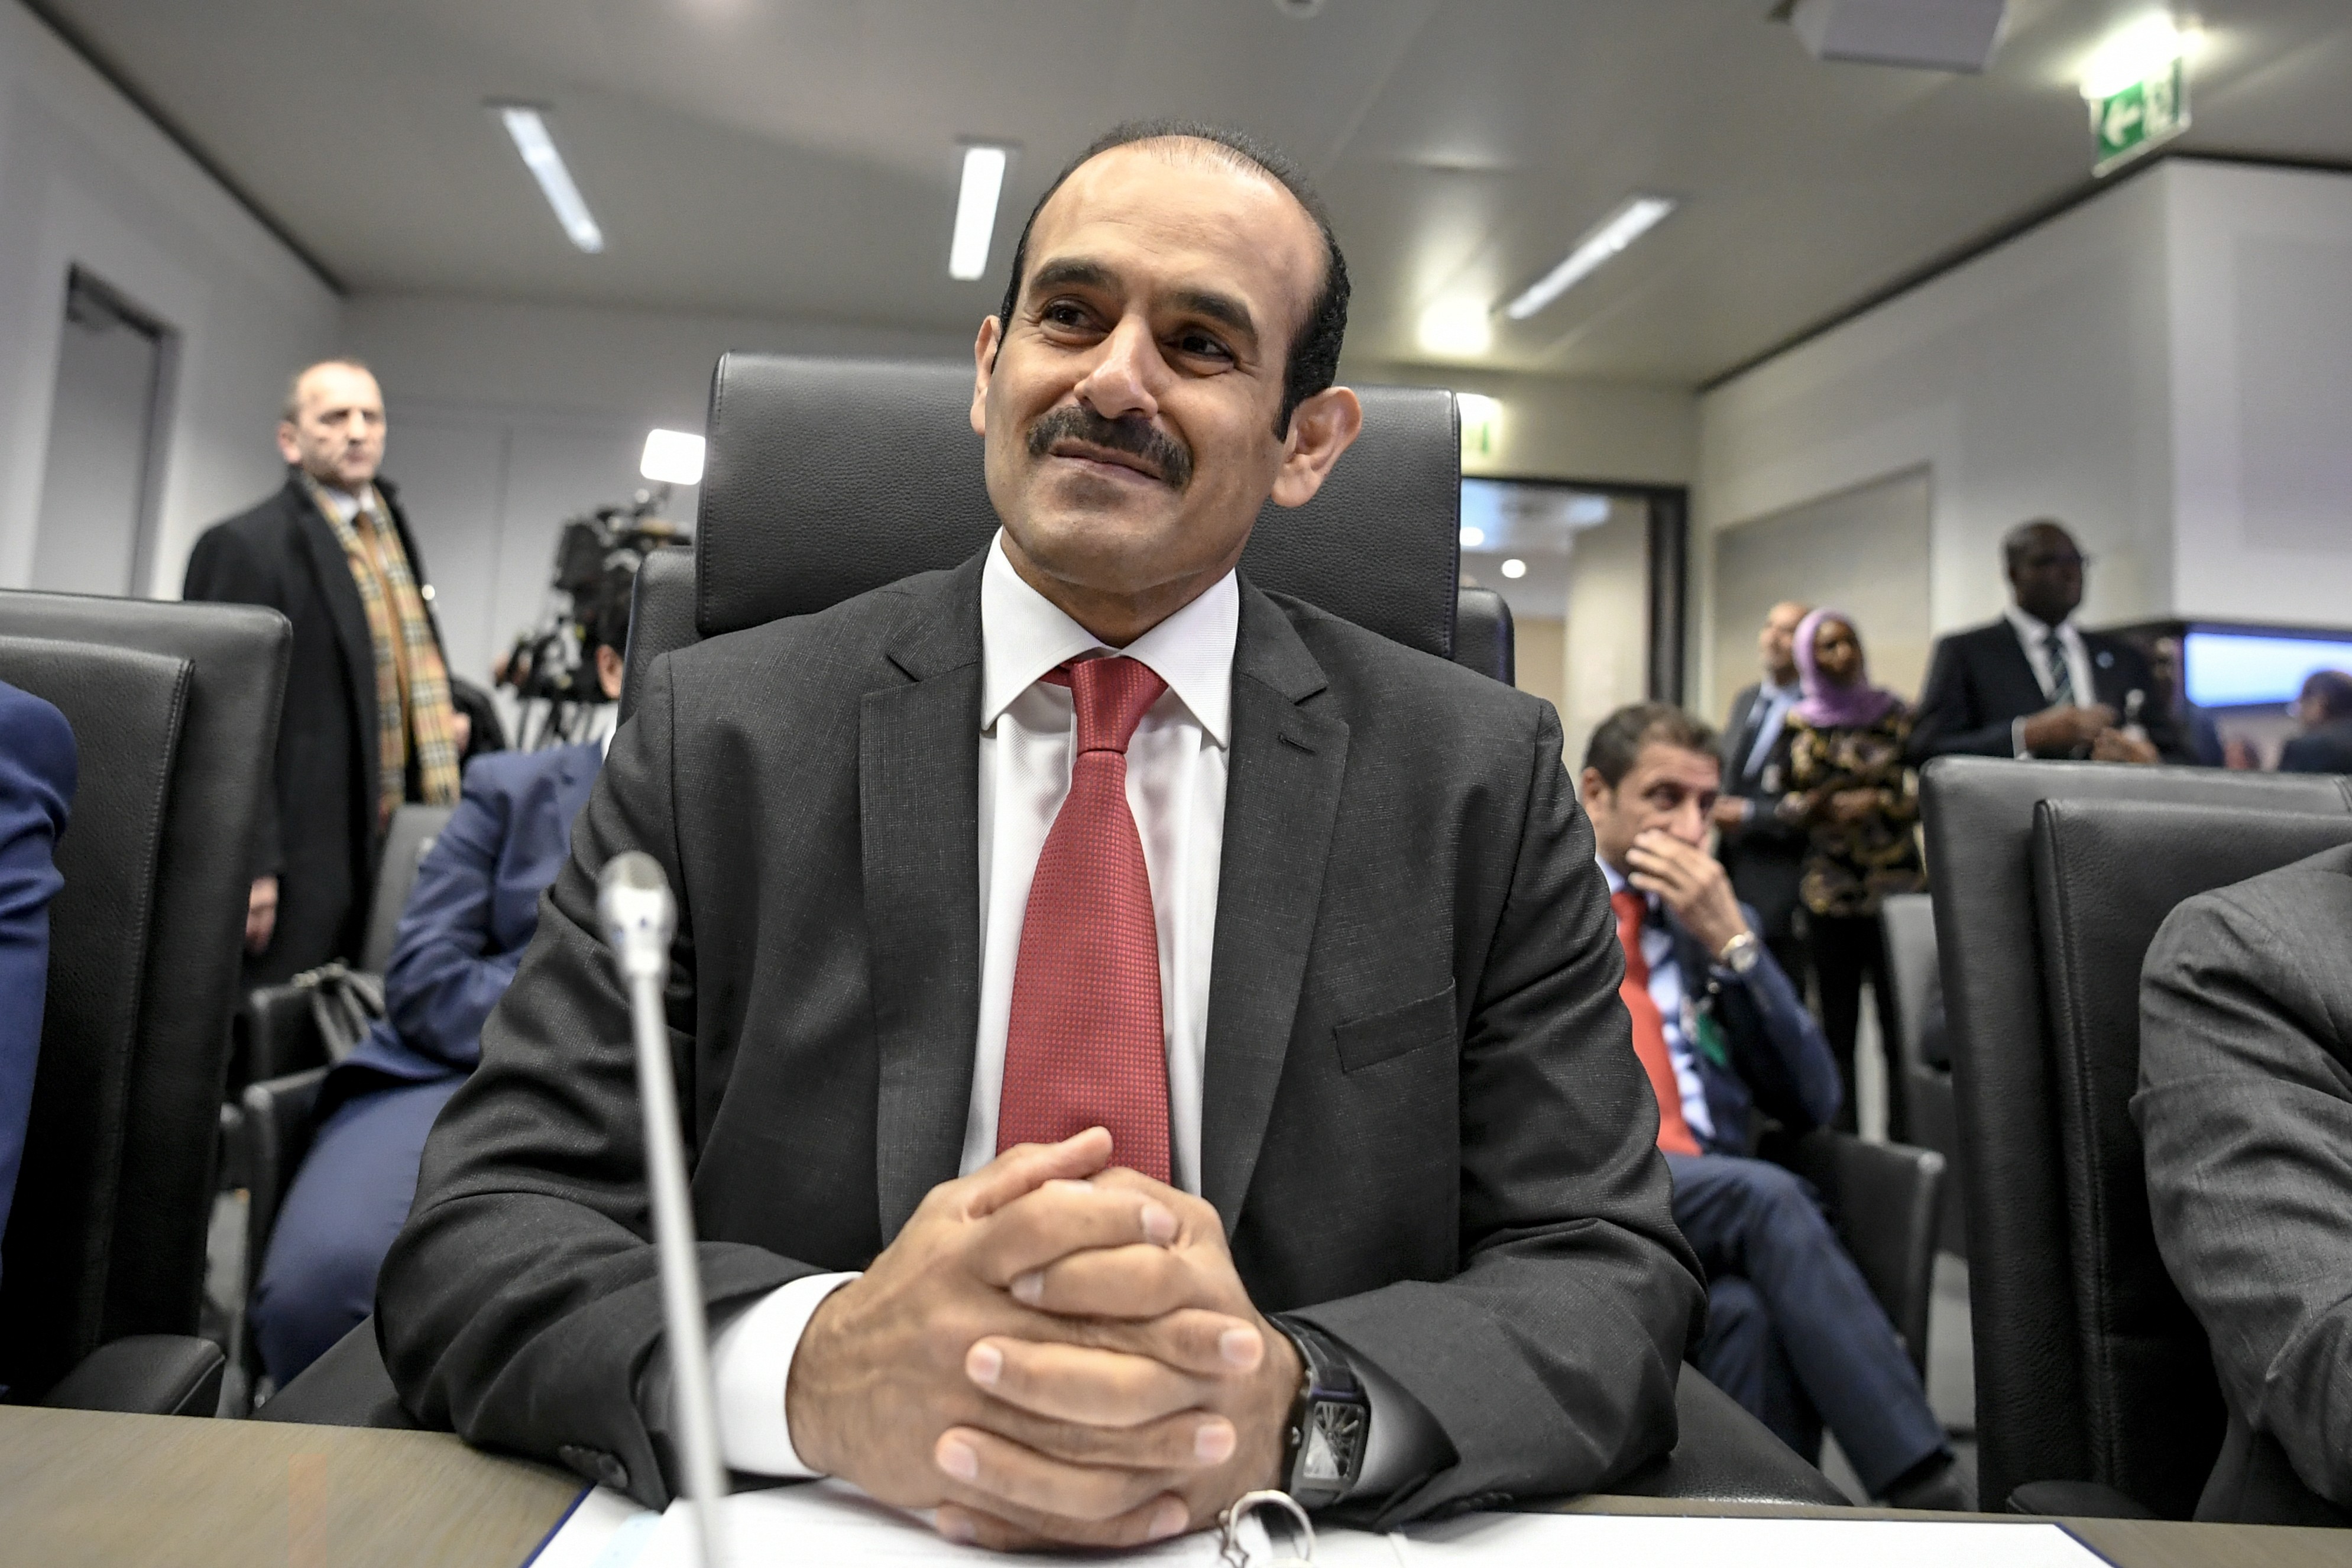 Saad al-Kaabi, Qater’s energy minister, speaks to the media before an Opec meeting in Vienna on December 6. He has said the decision to quit Opec is not linked to the political and economic boycott imposed in June 2017 by de facto bloc leader Saudi Arabia, as well as the UAE, Bahrain and Egypt. Photo: EPA-EFE